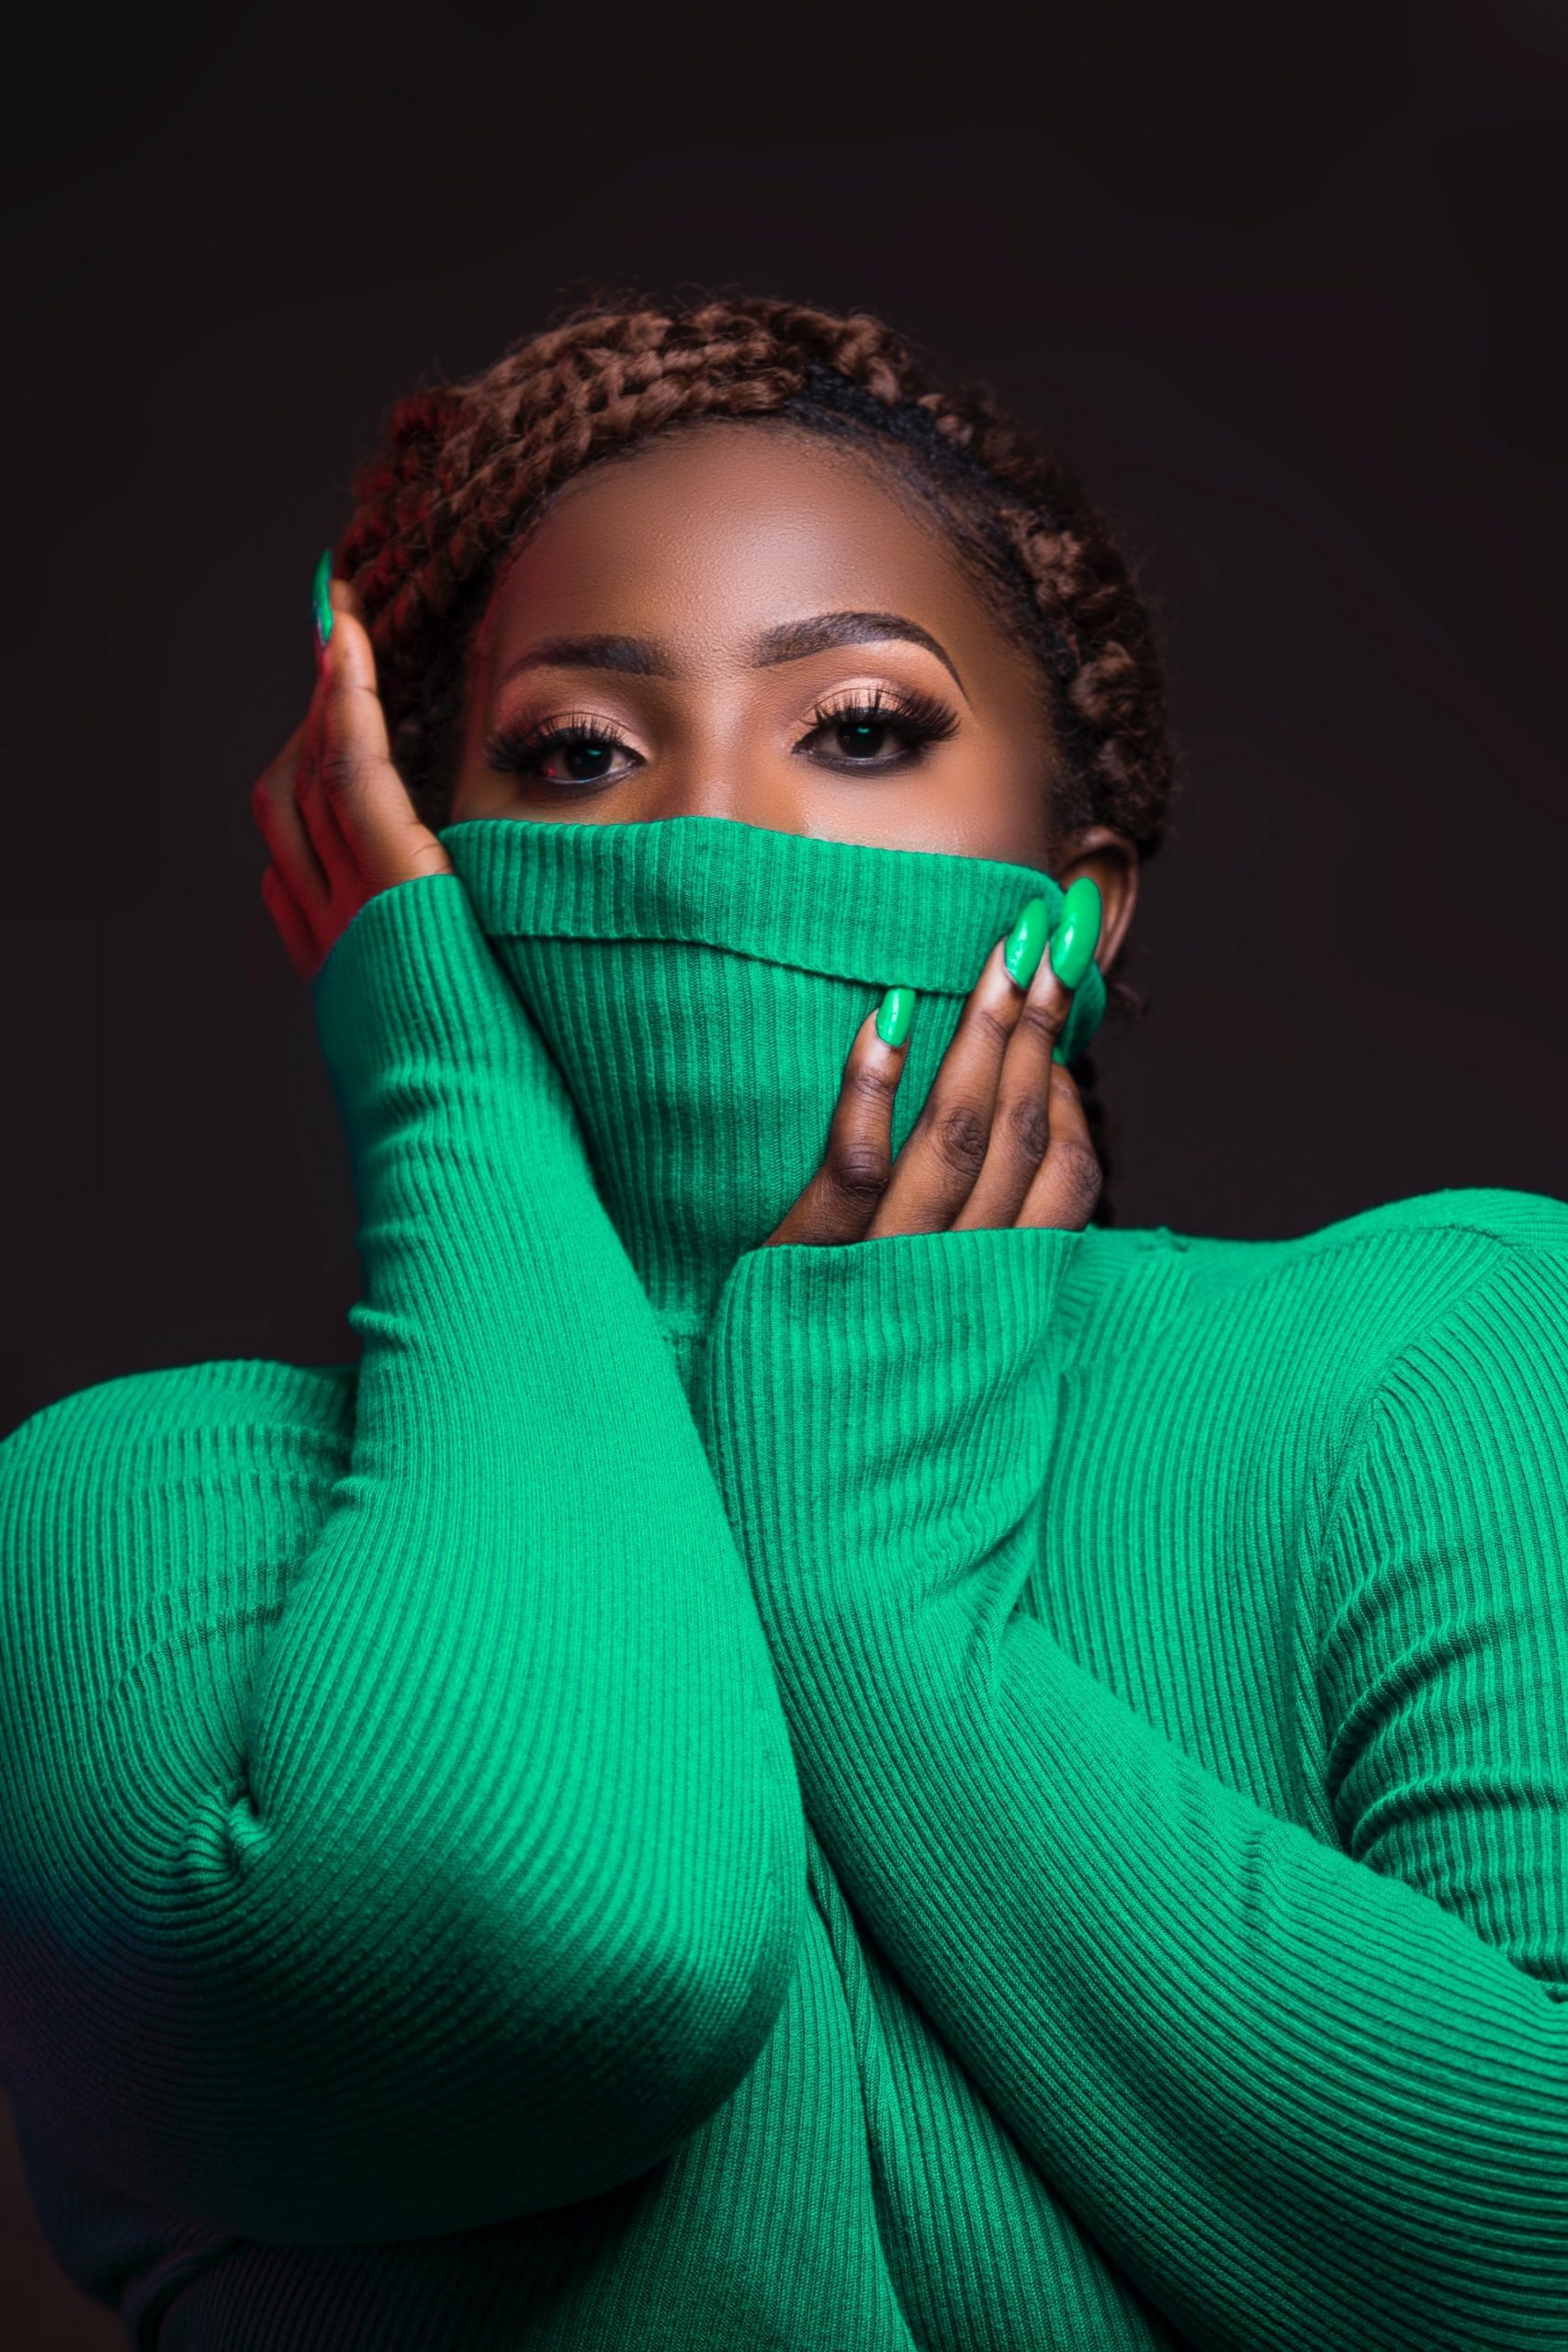 African Female Covering Mouth with Green Turtle Neck Sweater